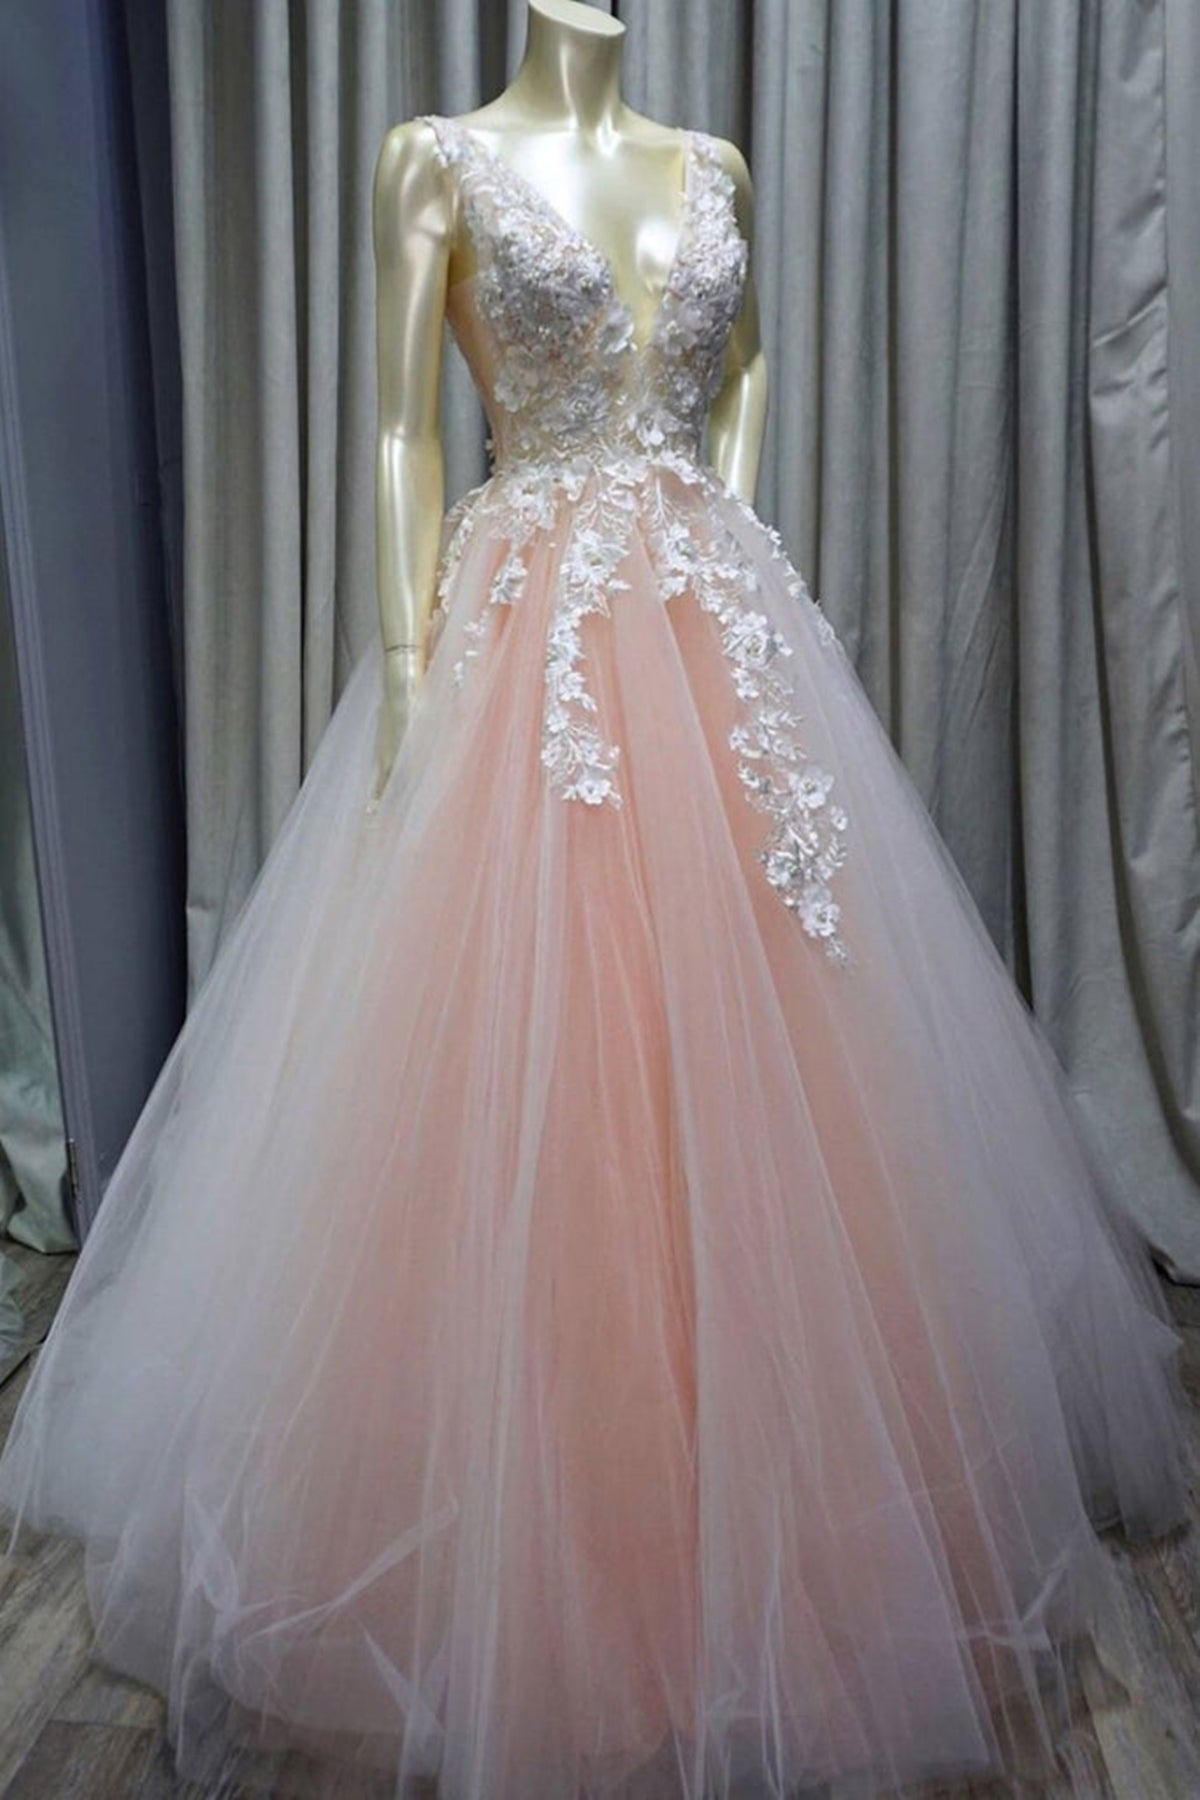 V Neck Pink Tulle Beaded Long Prom Dresses with White Lace Appliques, V Neck Pink Lace Formal Dresses, Pink Evening Dresses